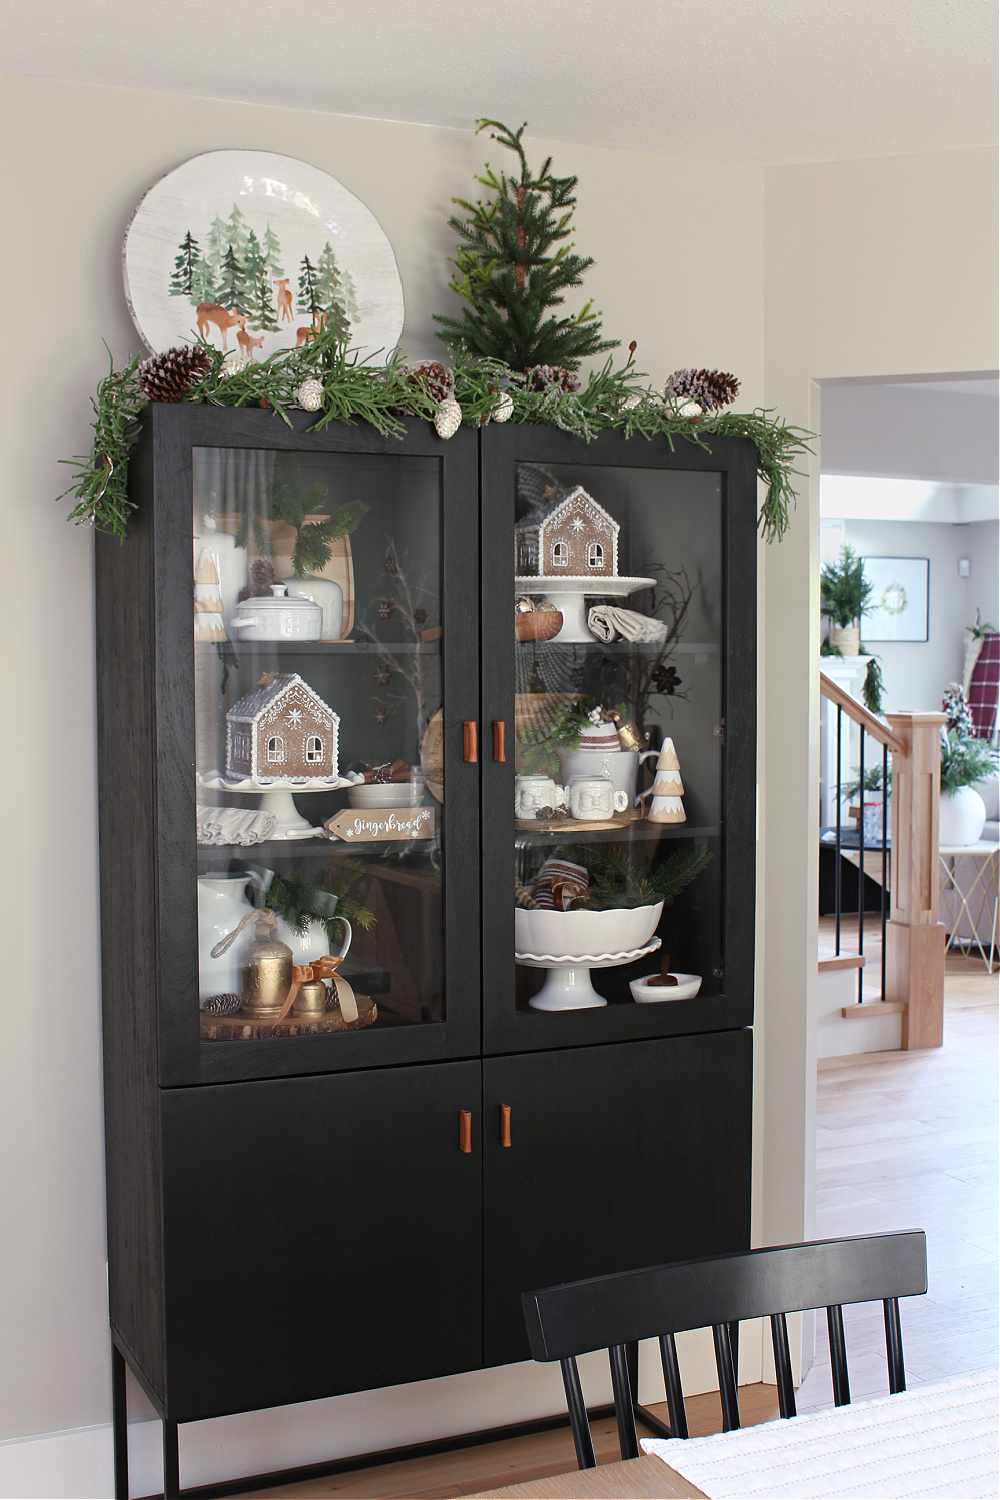 Black cabinet decorated for Christmas with gingerbread houses, greenery, and white dinnerware.